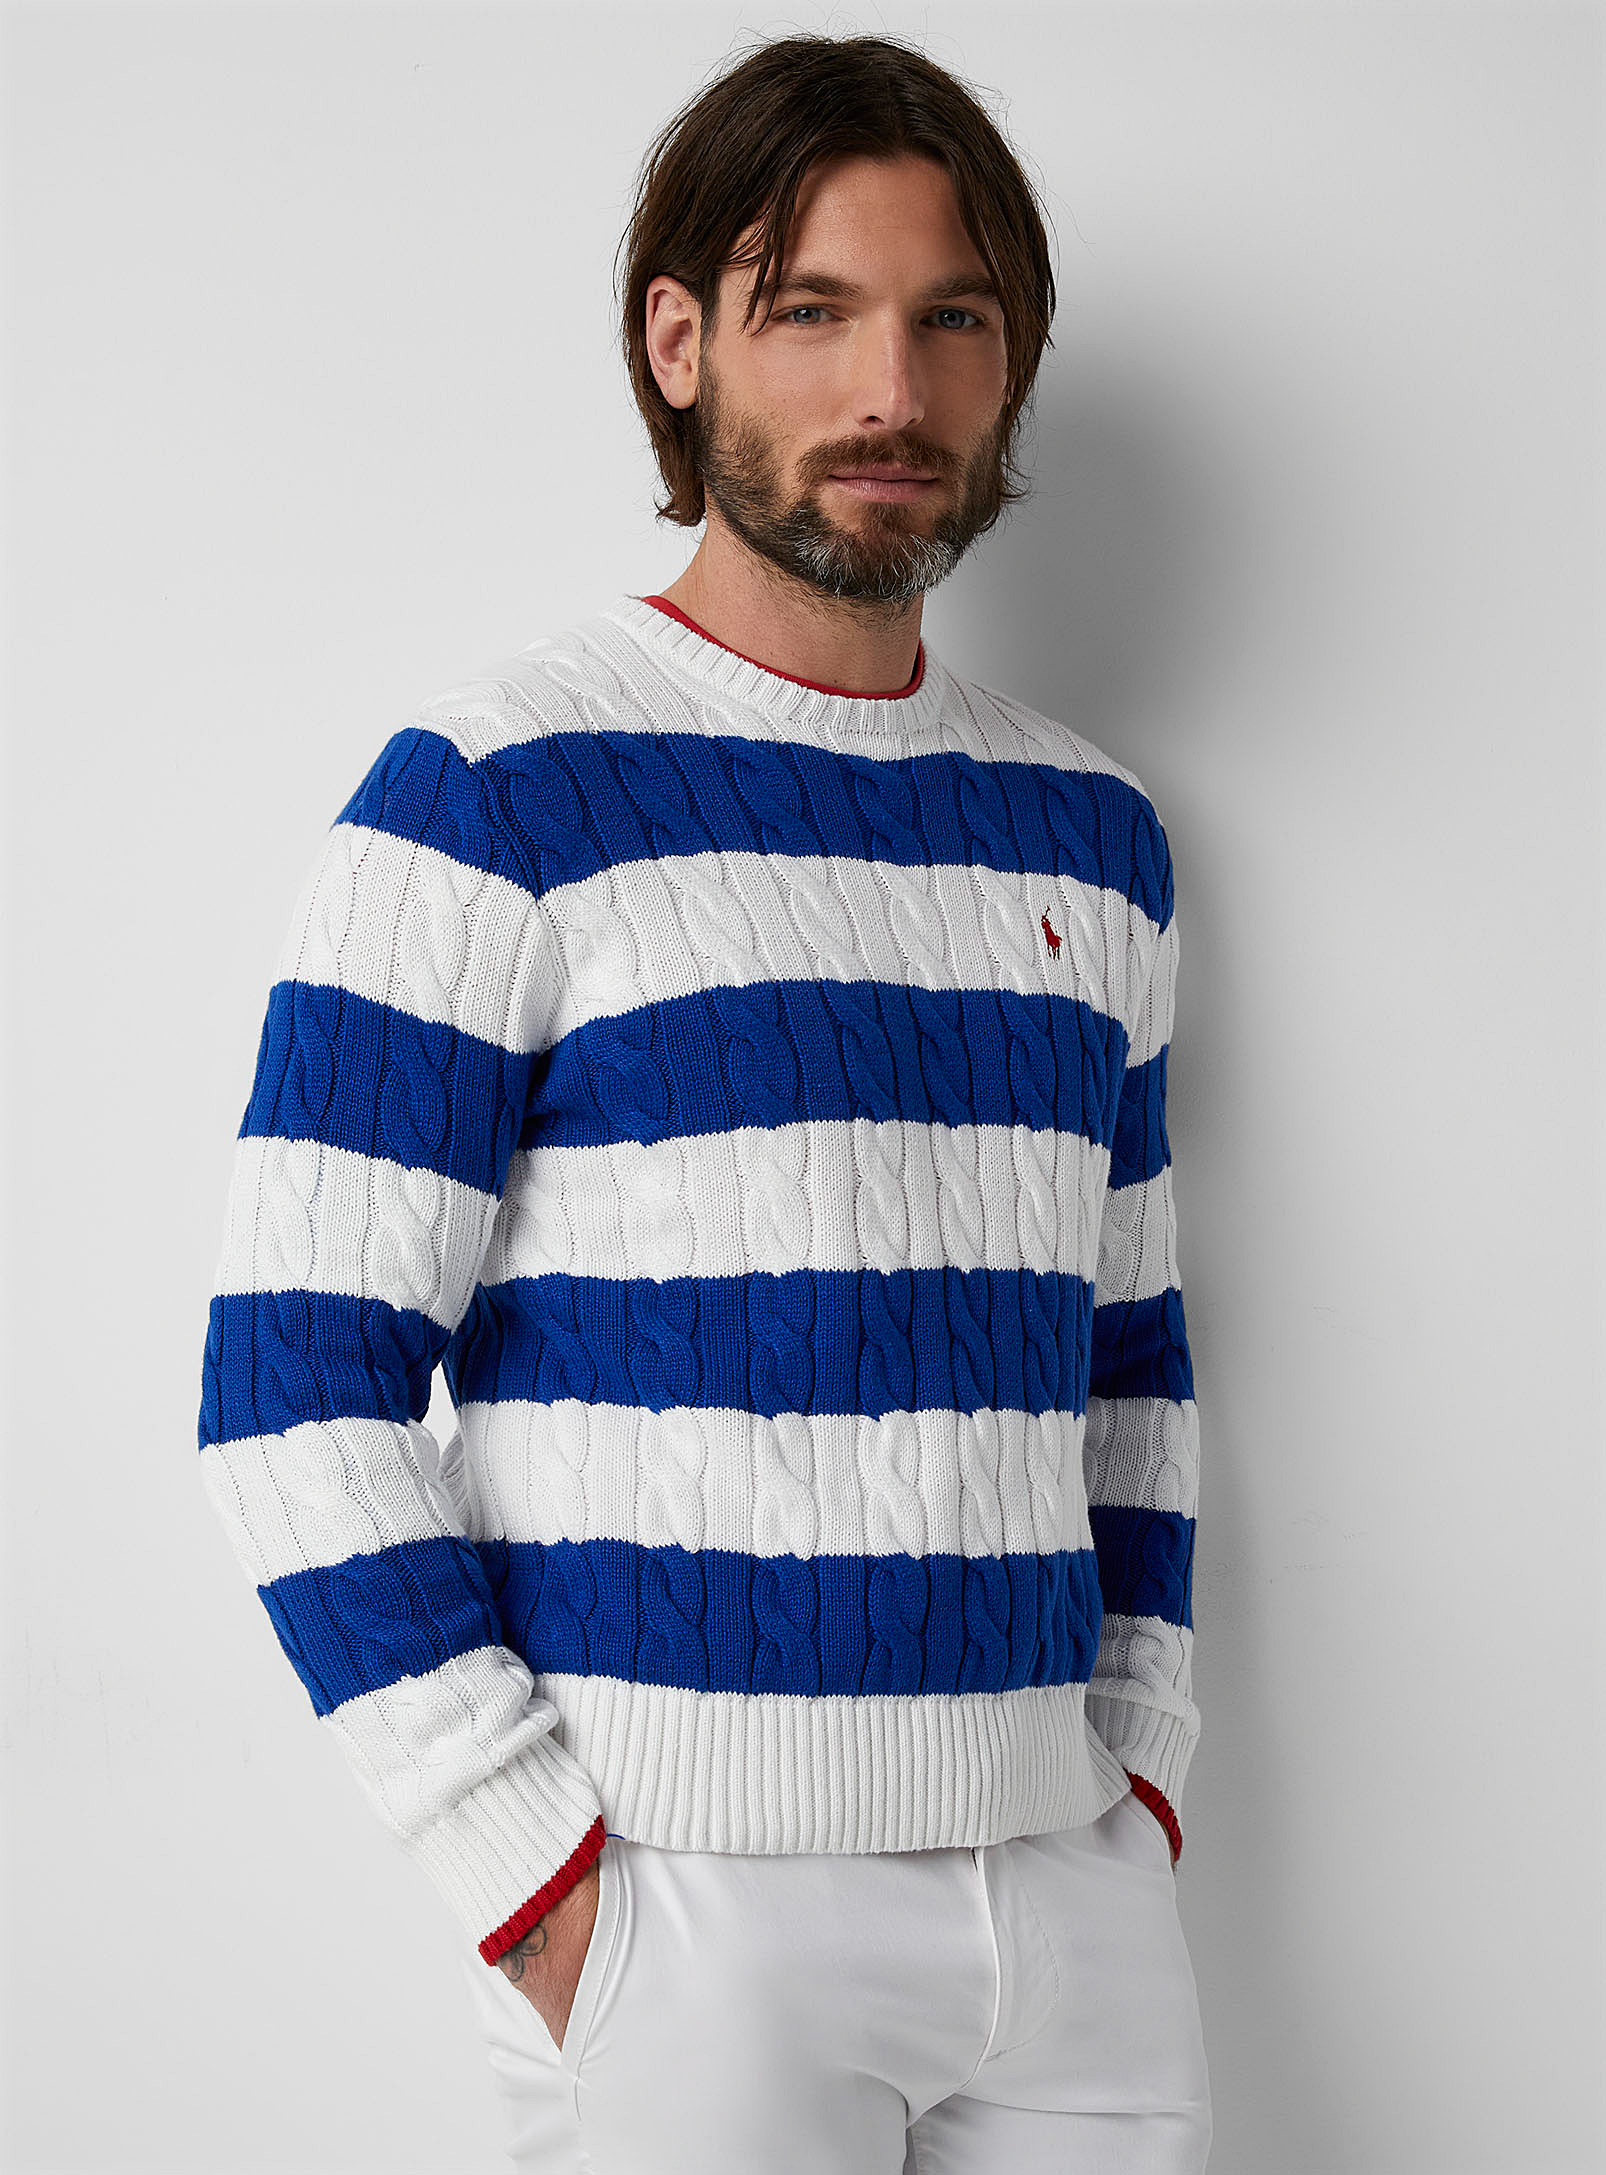 Polo Shirt Ralph Lauren - Men's Twisted-cable knit striped sweater